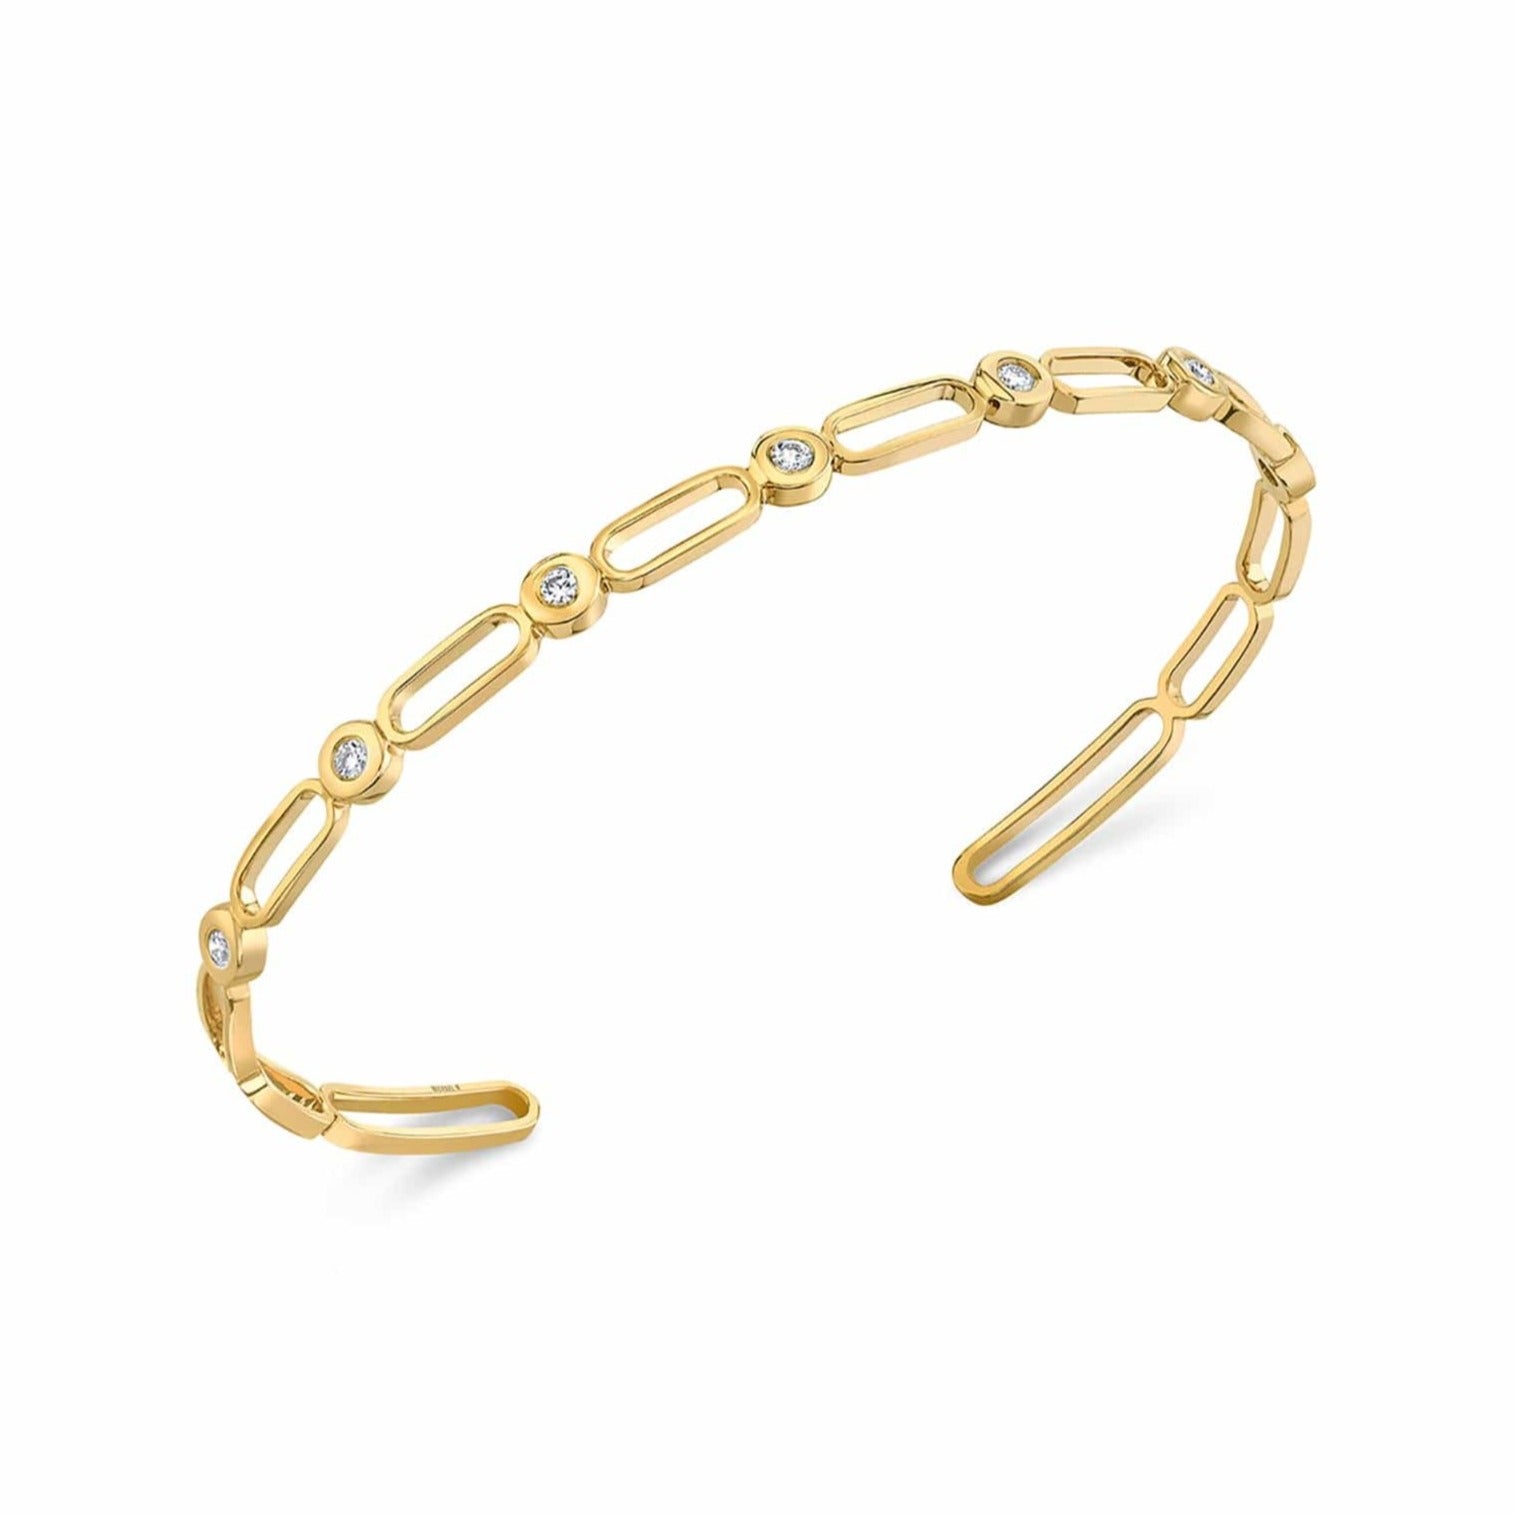 MICHAEL M Bracelets 14K Yellow Gold / Small Connection Cuff Yellow/White Gold BR358